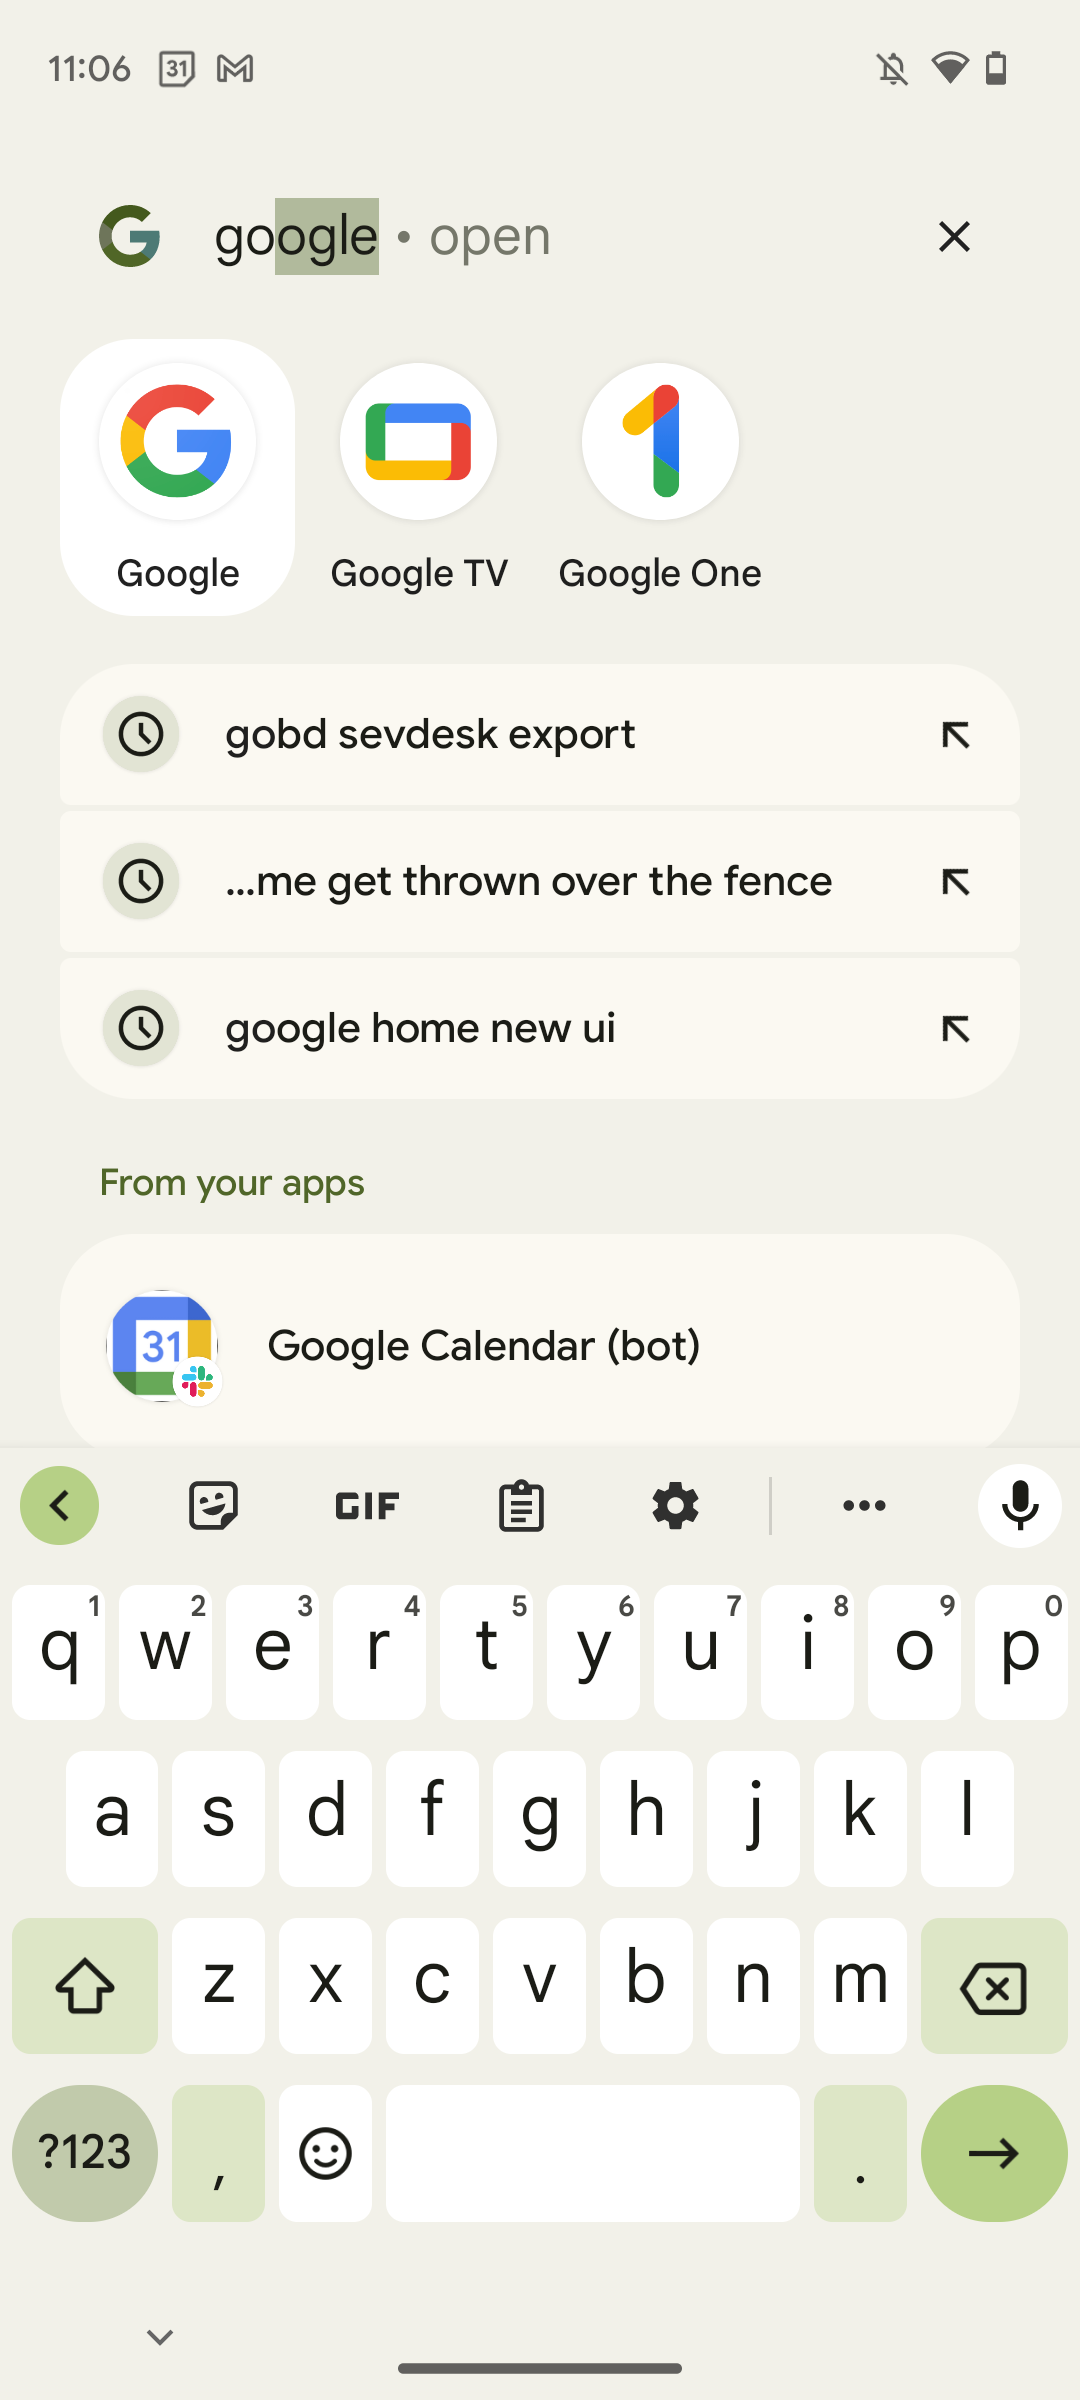 Screenshot of Google Pixel's launcher search showing how the first result (Google) is highlighted, which indicates that you can tap enter to start the app.